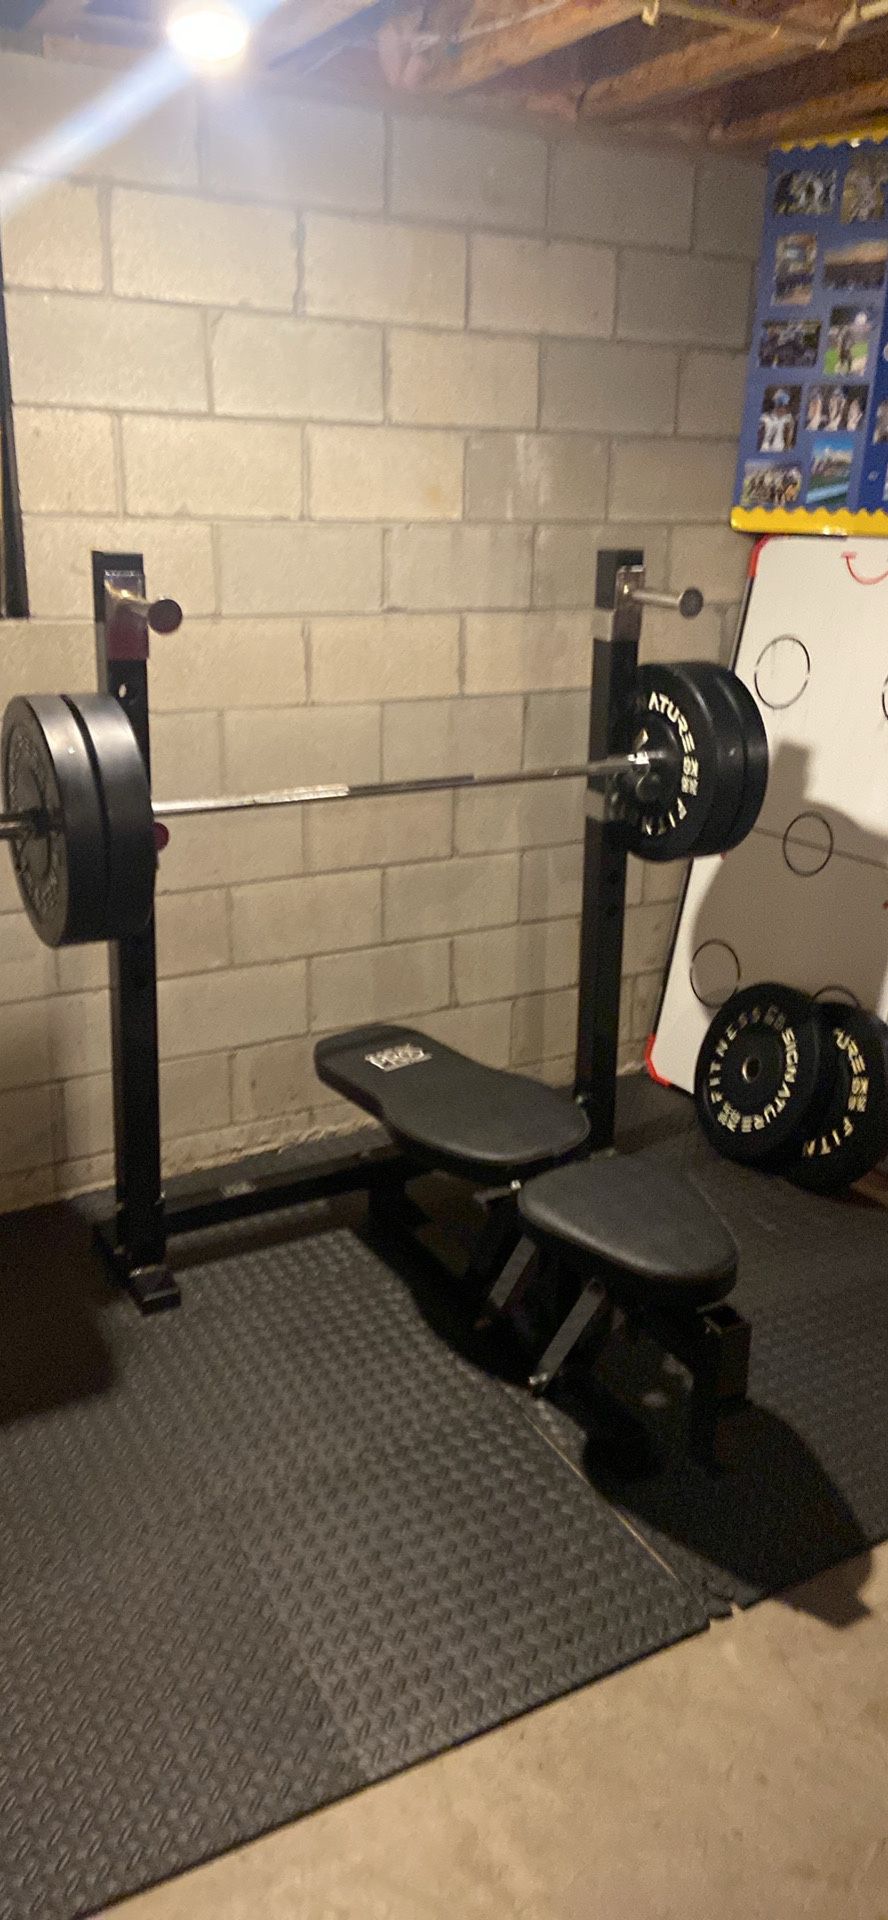 Weightlifting Bench Marcy Pro